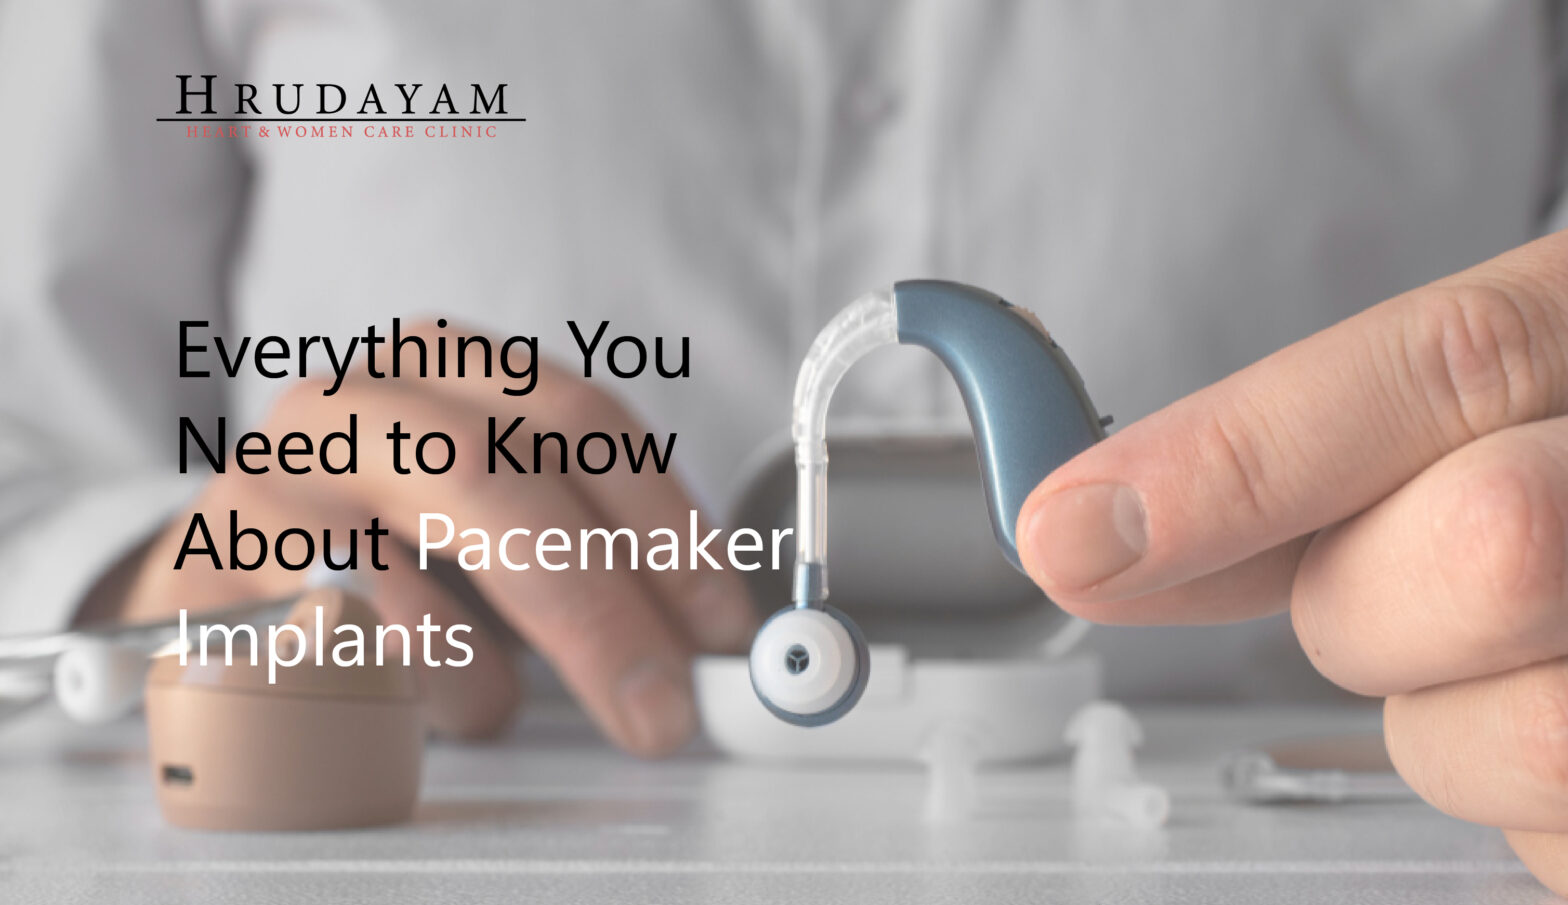 Everything You Need to Know About Pacemaker Implants